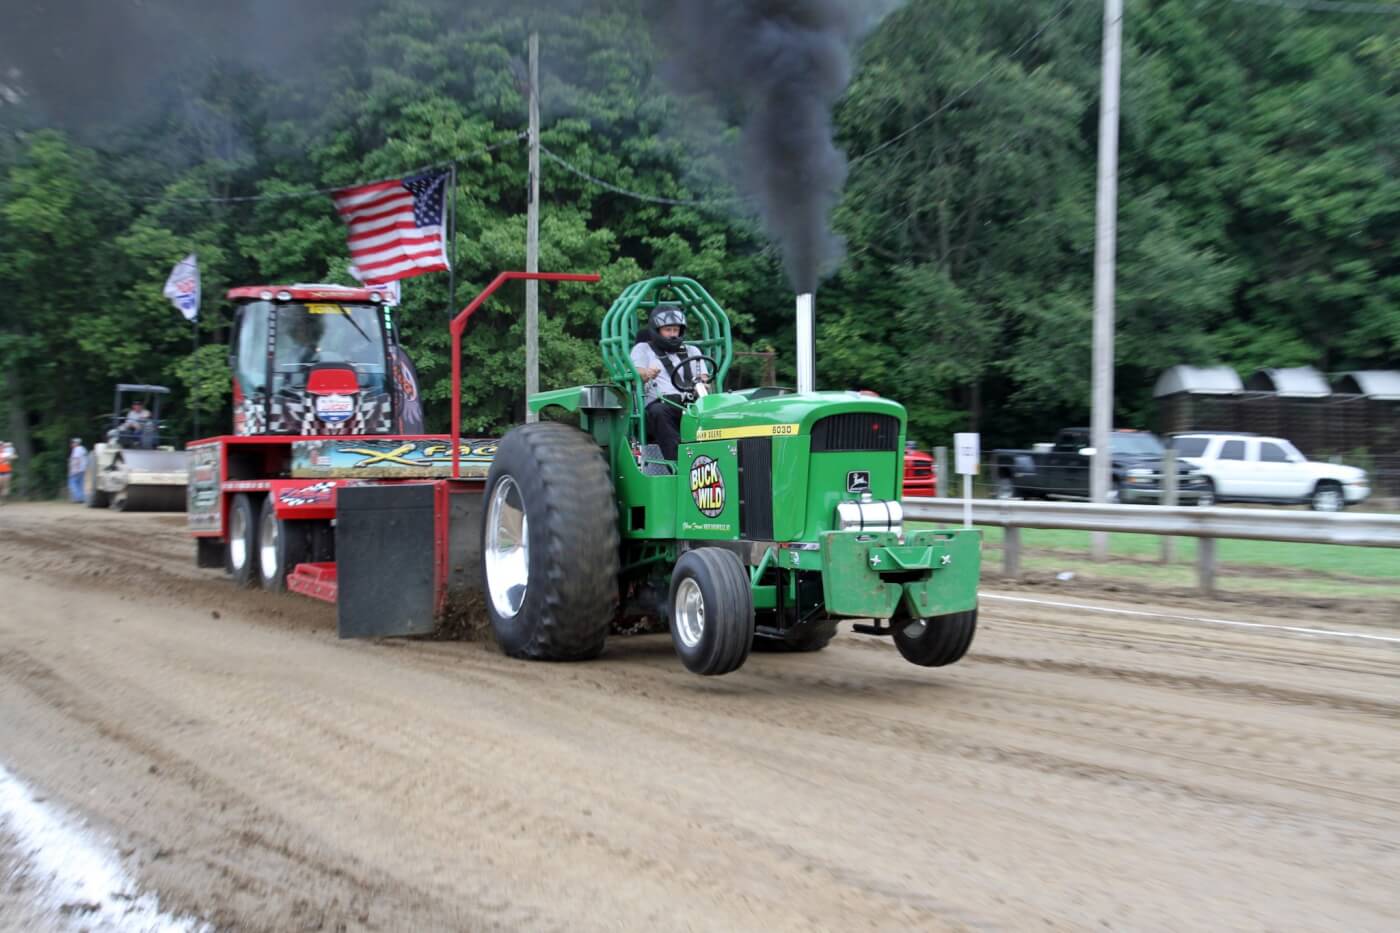 Brandon Glenn simply dominated the tractor classes taking first place in all three classes with his “Buck Wild” John Deere.